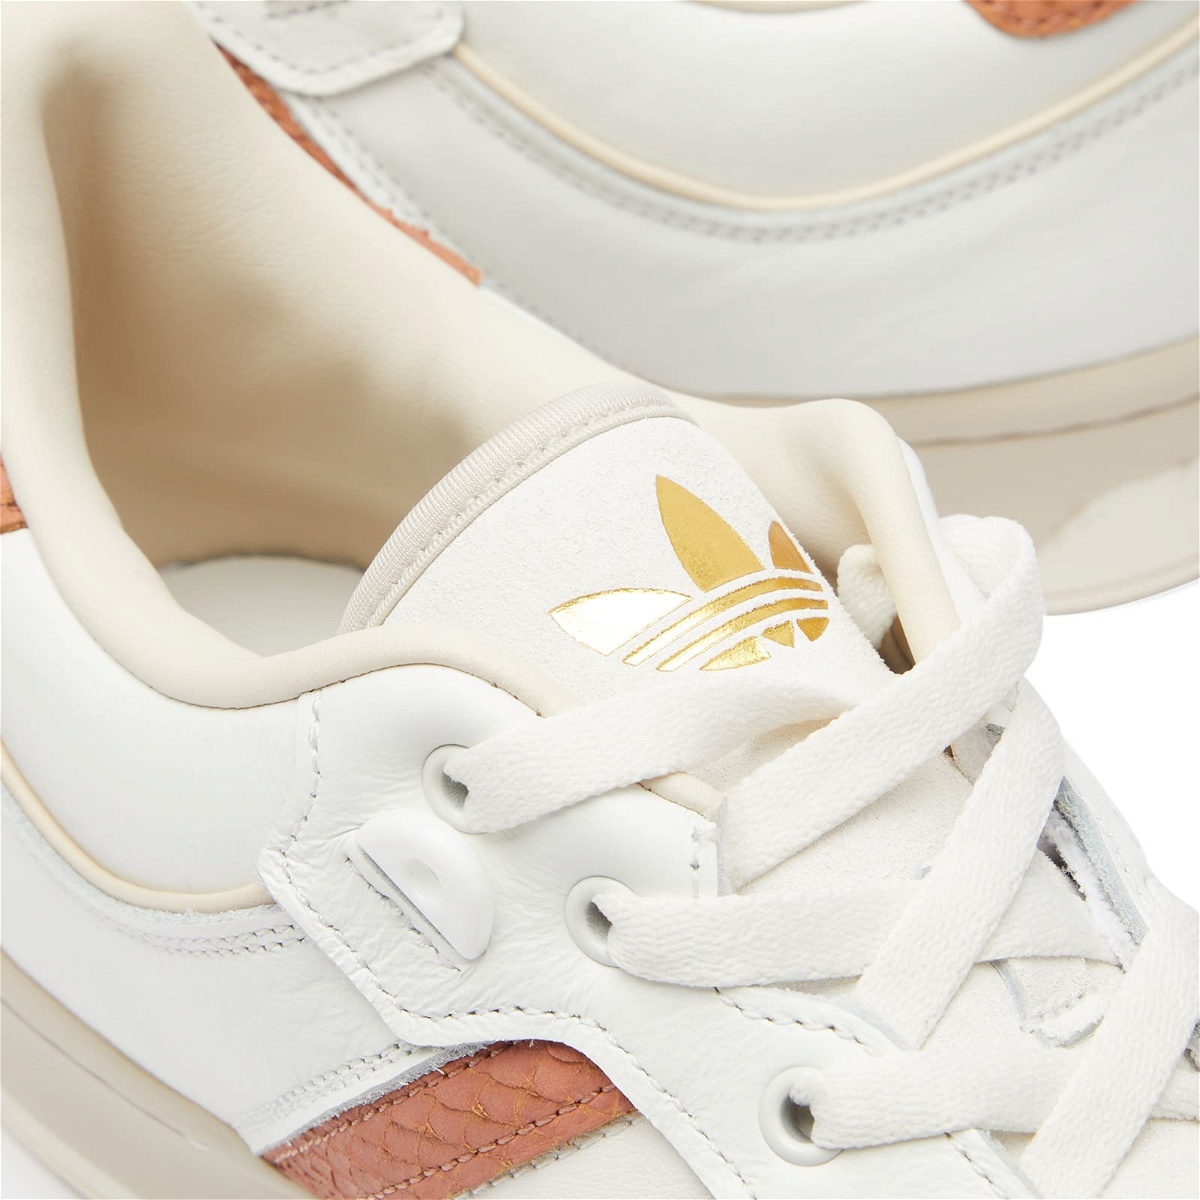 White/Clay in Low Strata 86 Adidas Rivalry Core adidas Sneakers